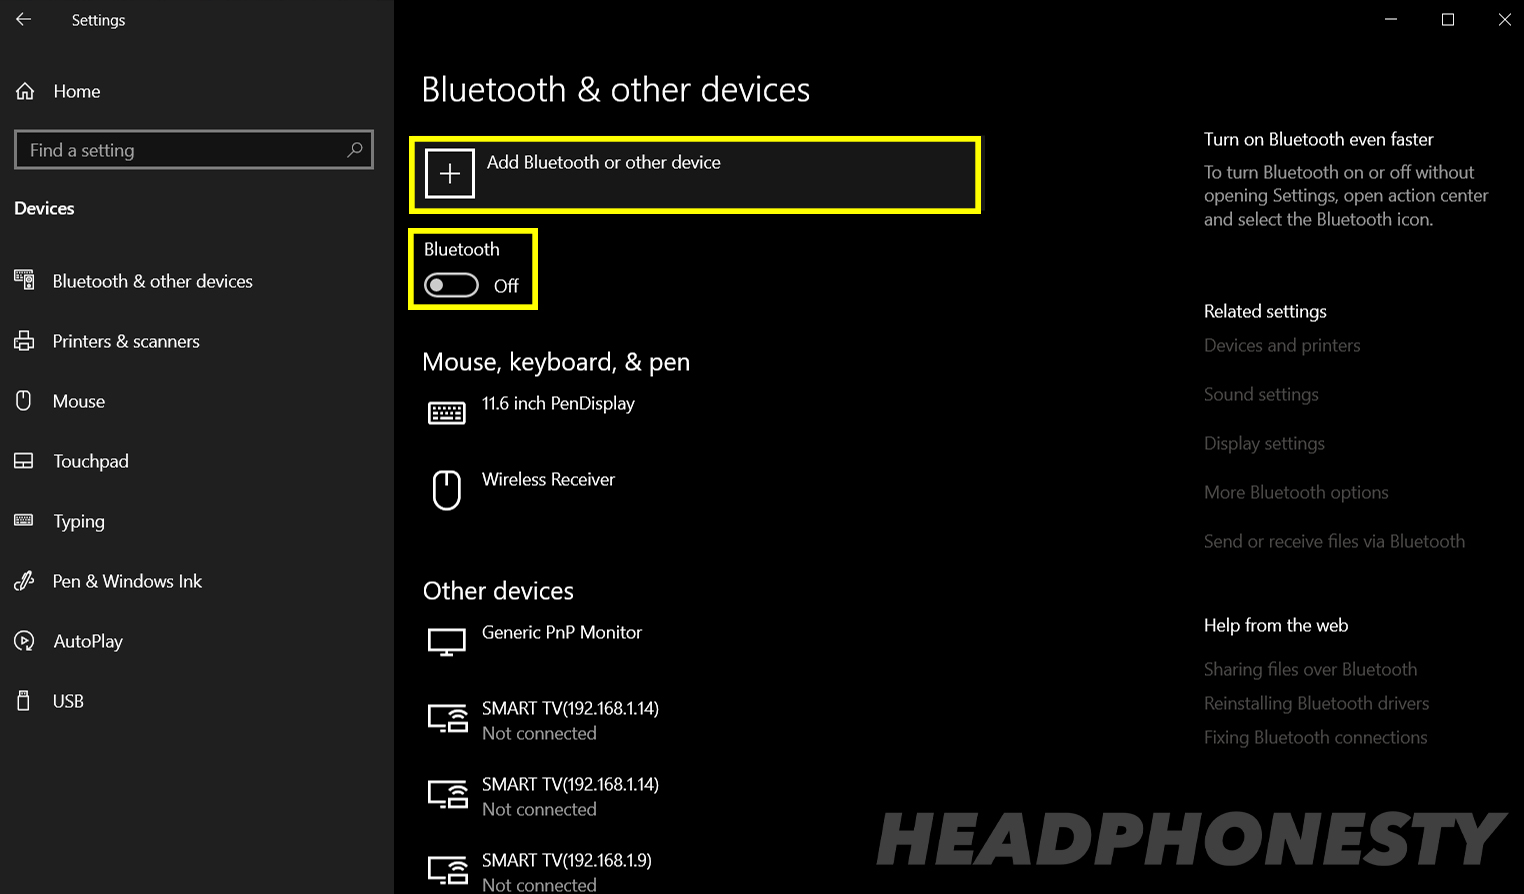 Restart devices: Try restarting both your laptop and Bluetooth headphones to refresh the connection.
Reset Bluetooth settings: Reset the Bluetooth settings on your laptop and pair the headphones again.